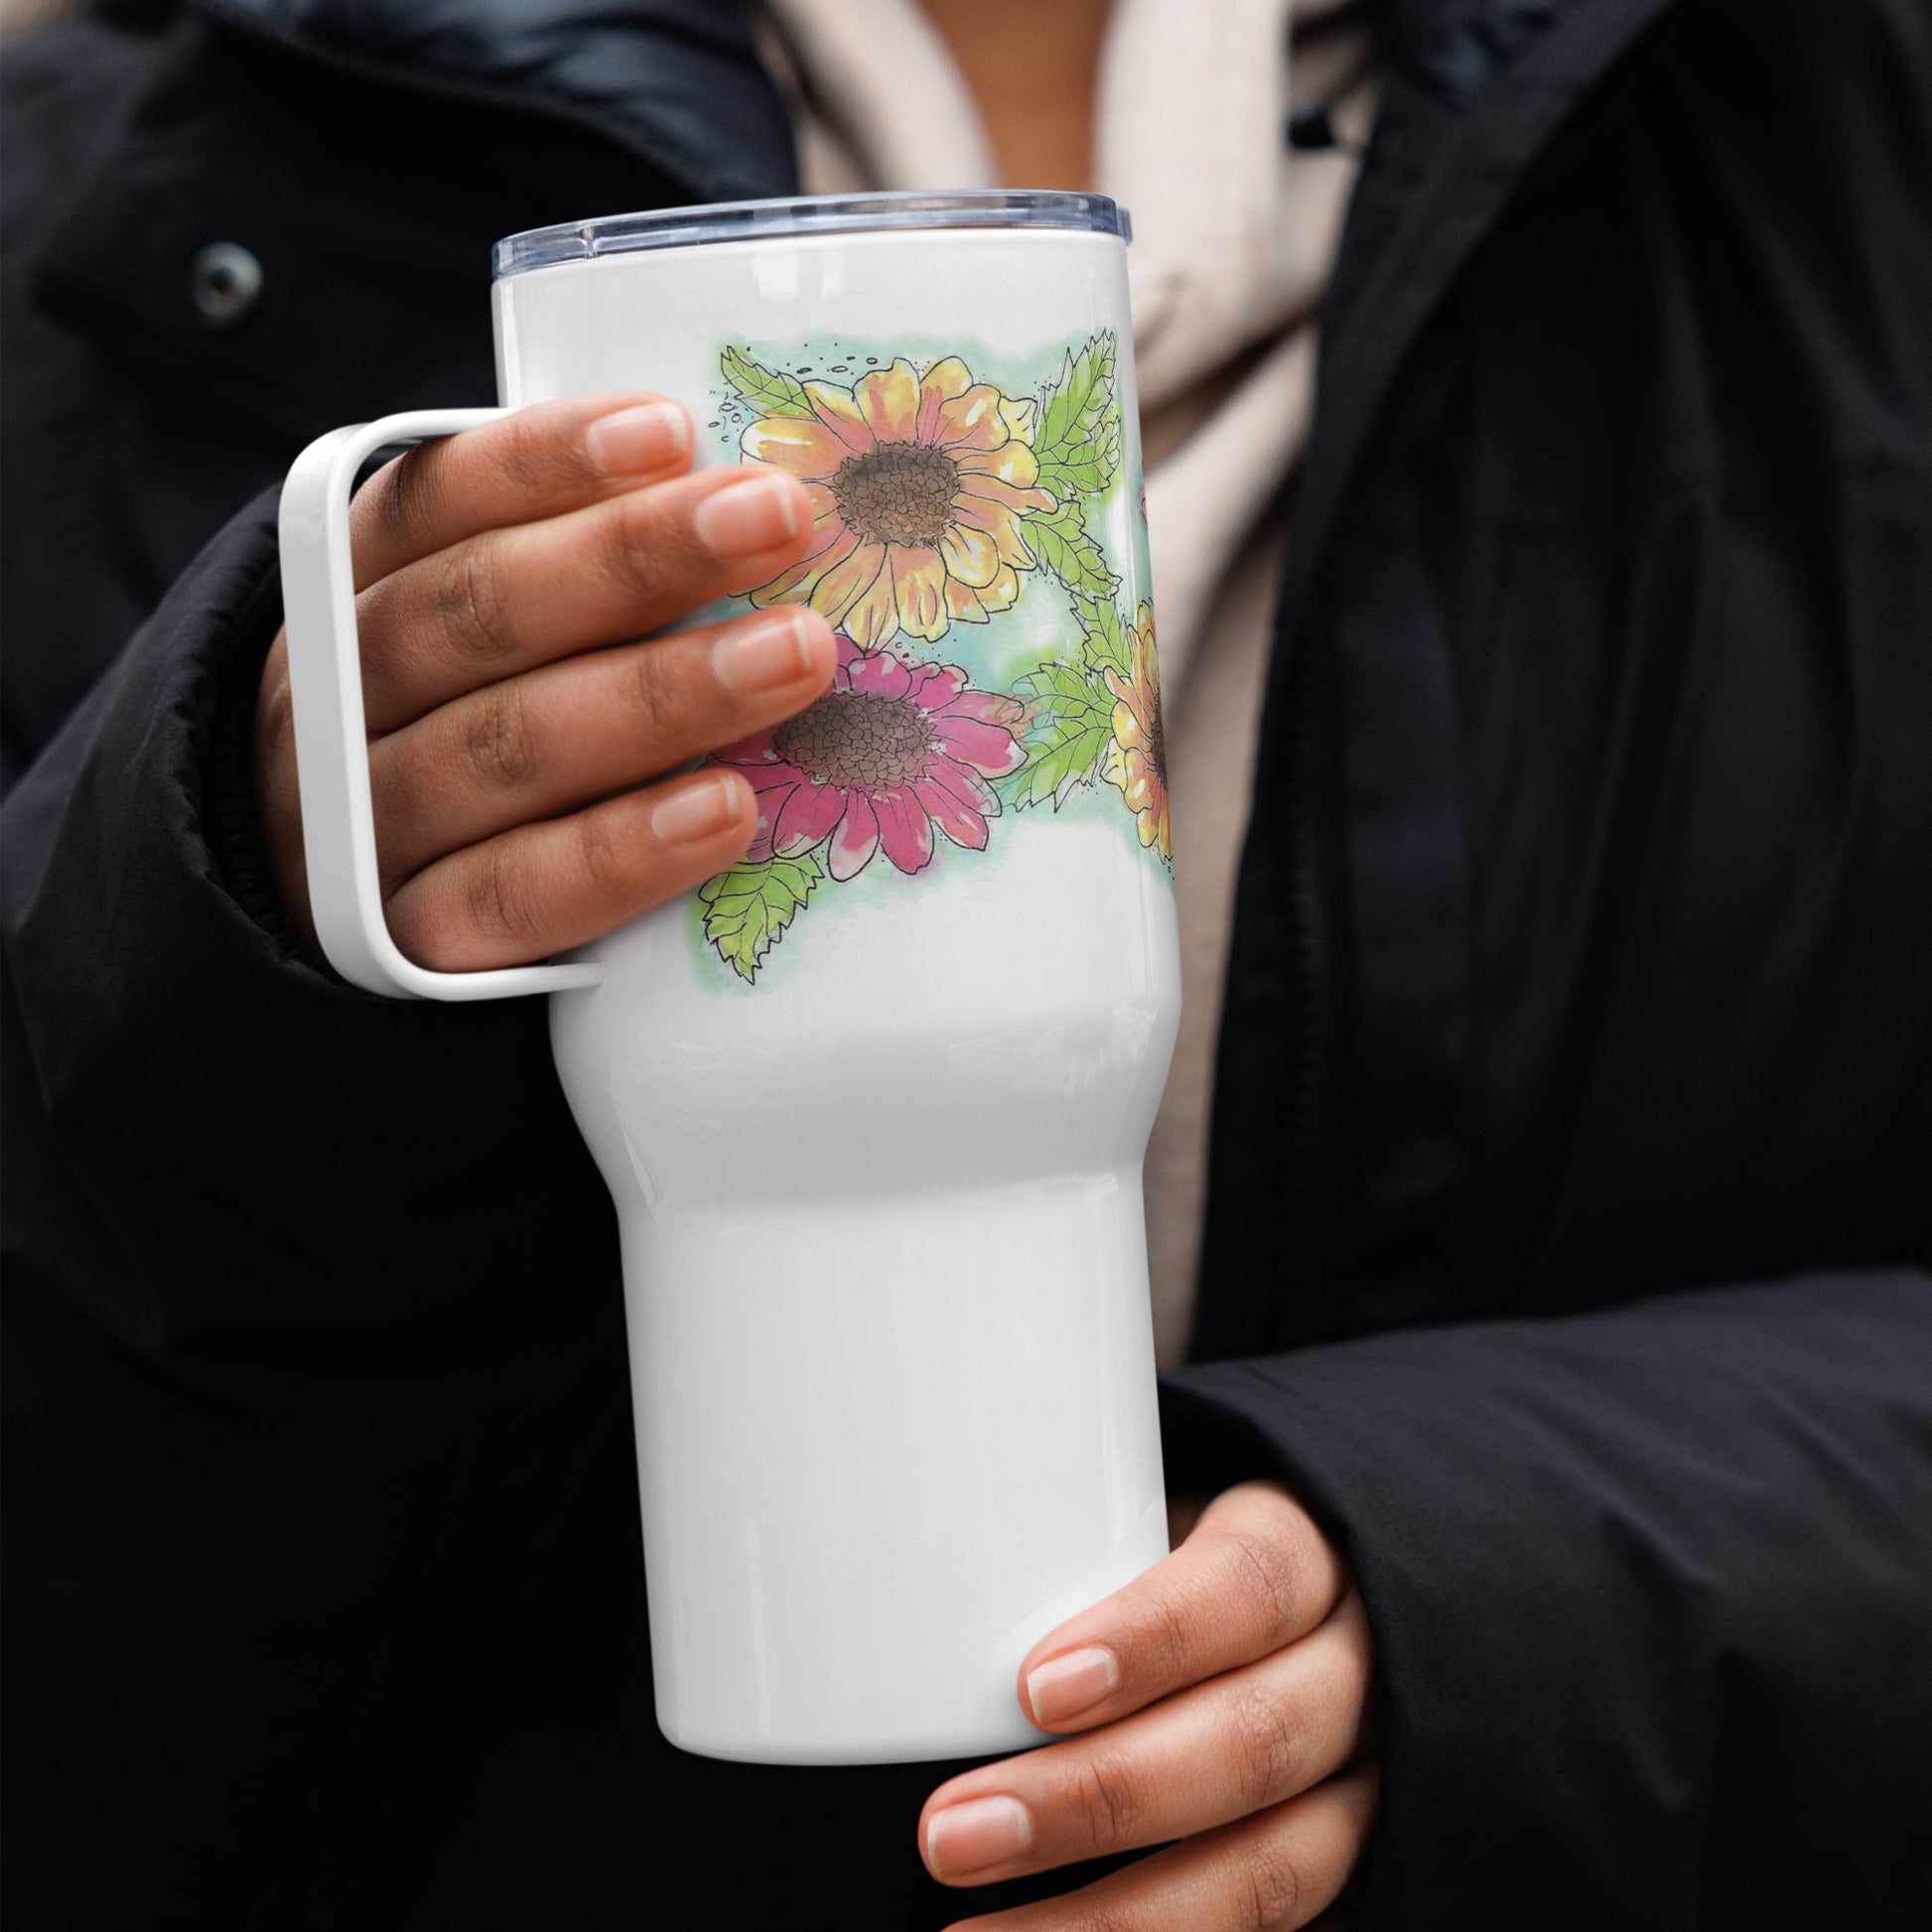 Gerber daisies stainless steel travel mug with handle. Holds 25 ounces and has a BPA-free plastic lid. Shown in model's hands.